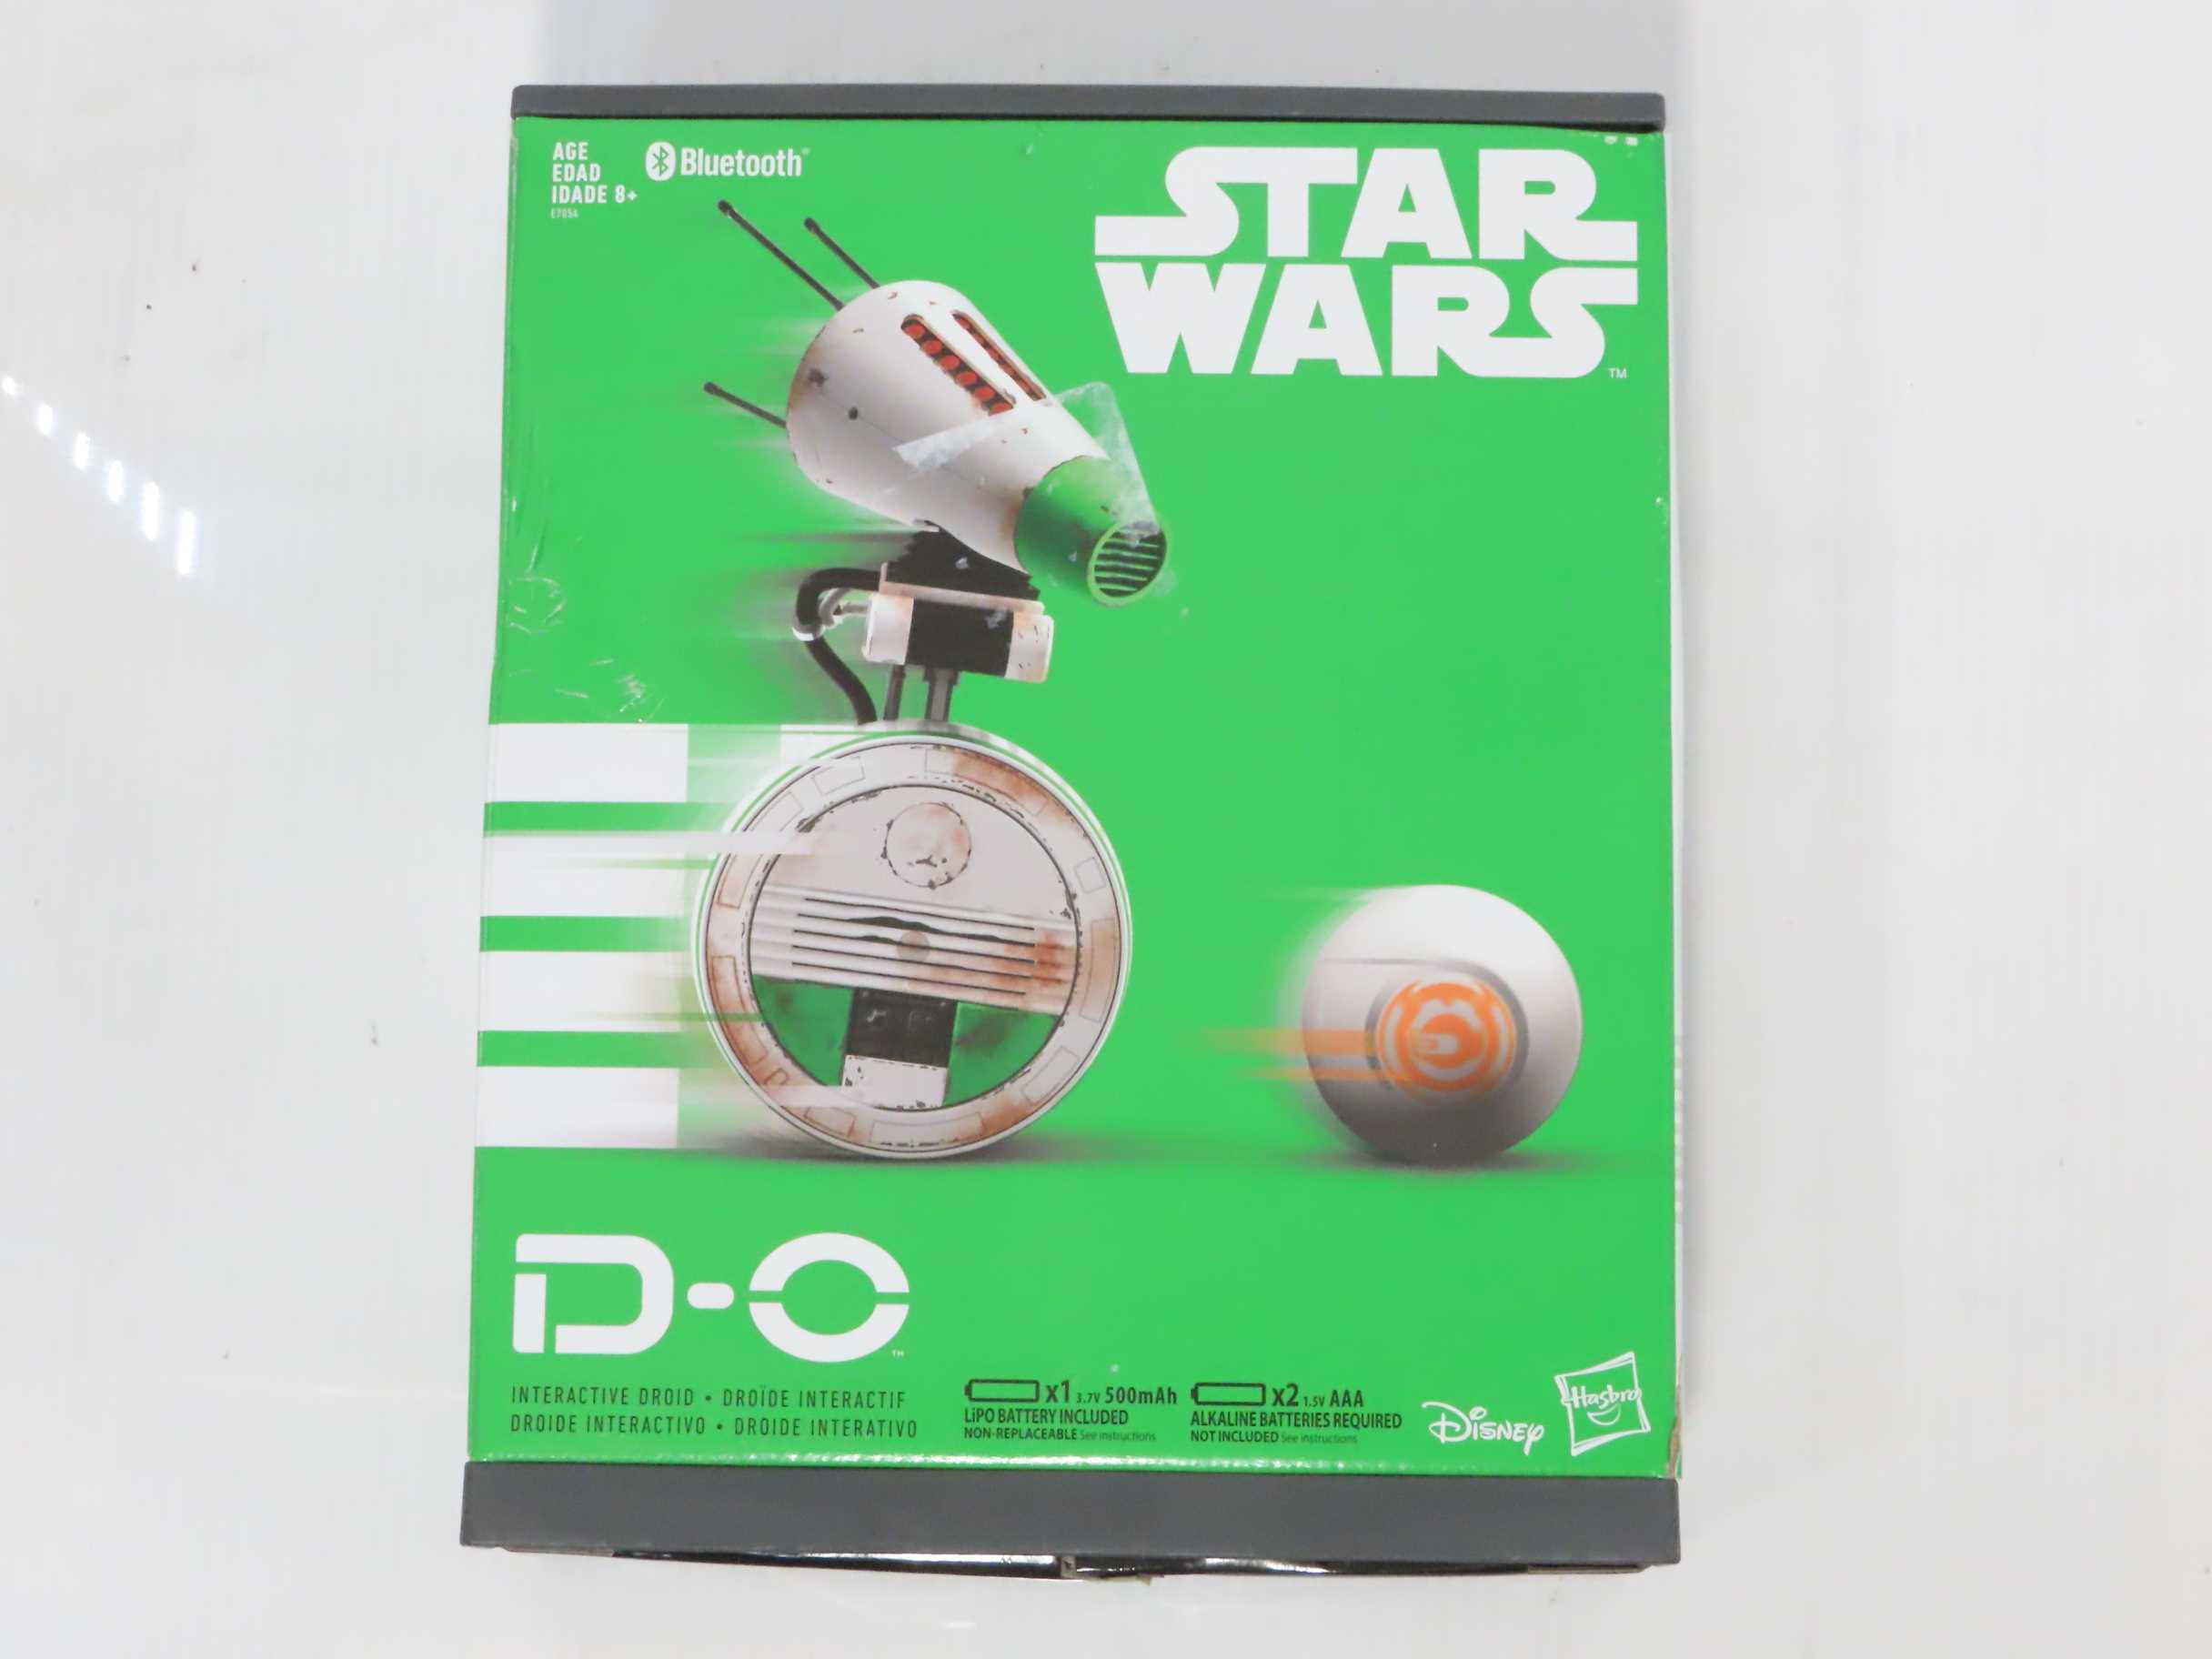 Star Wars D-O Exclusive Bluetooth Remote Control Interactive Droid Skywalker 